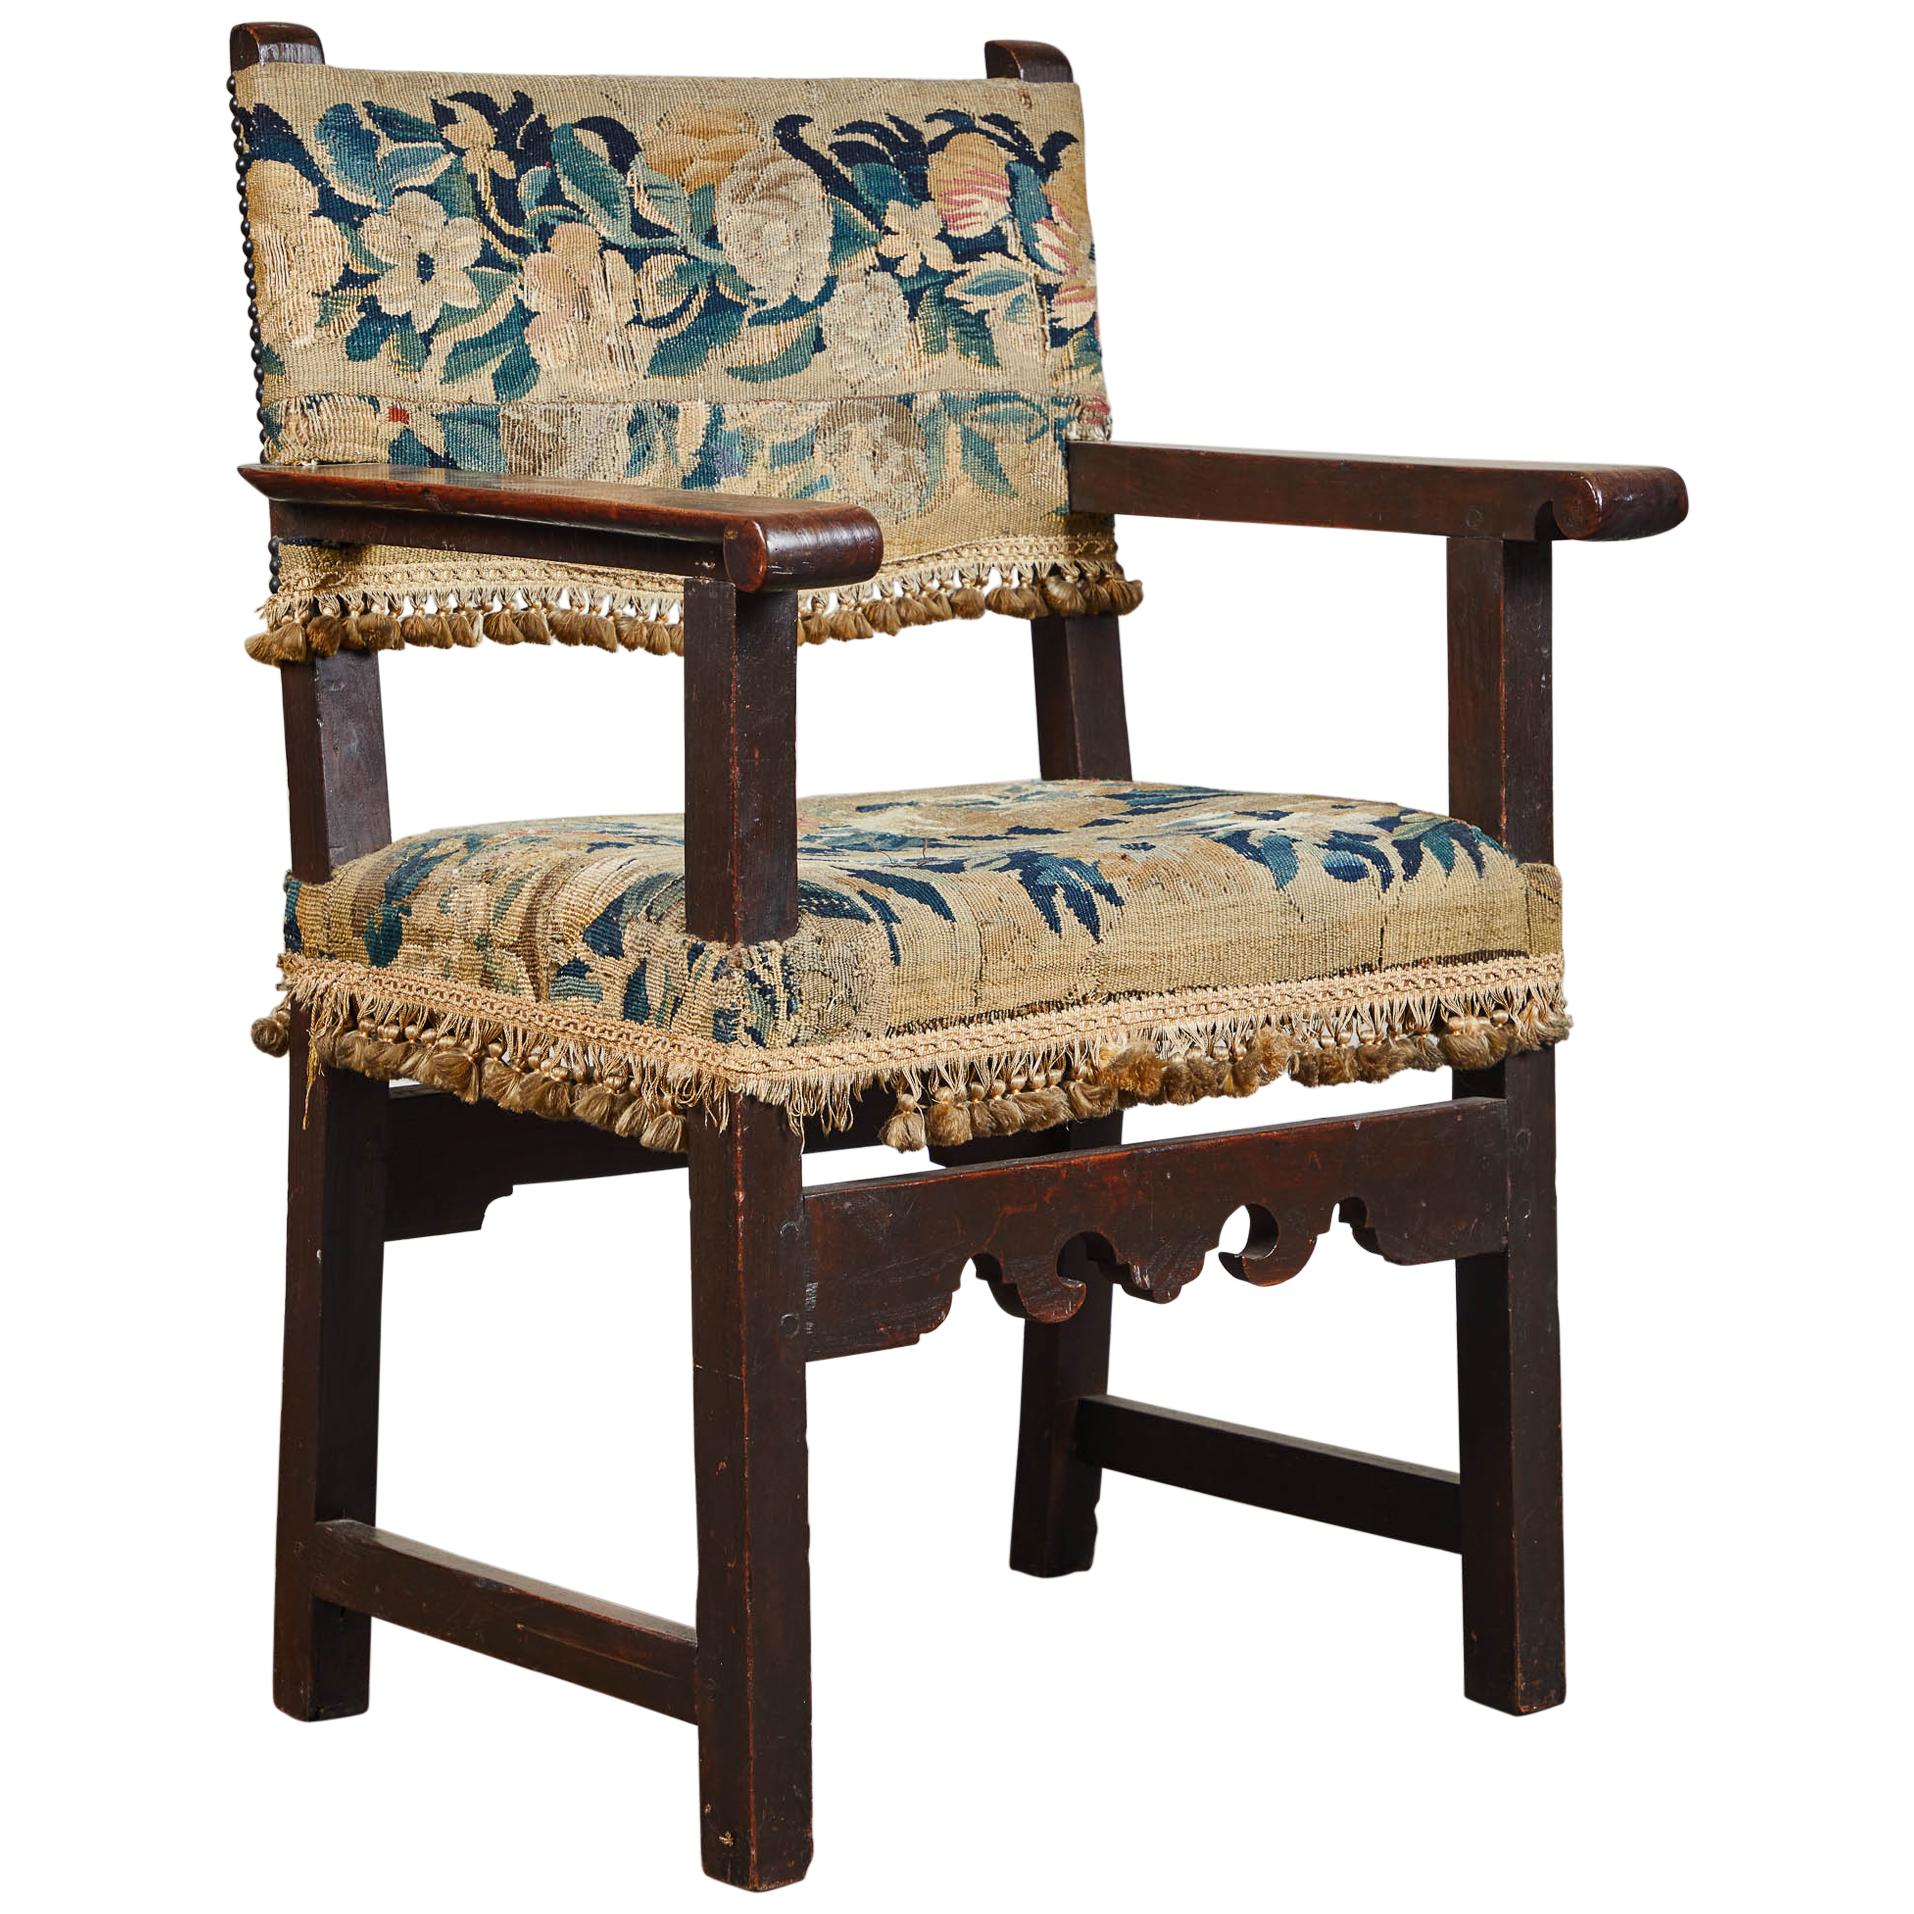 19th Century Spanish Walnut Chair with Embroidered Upholstery